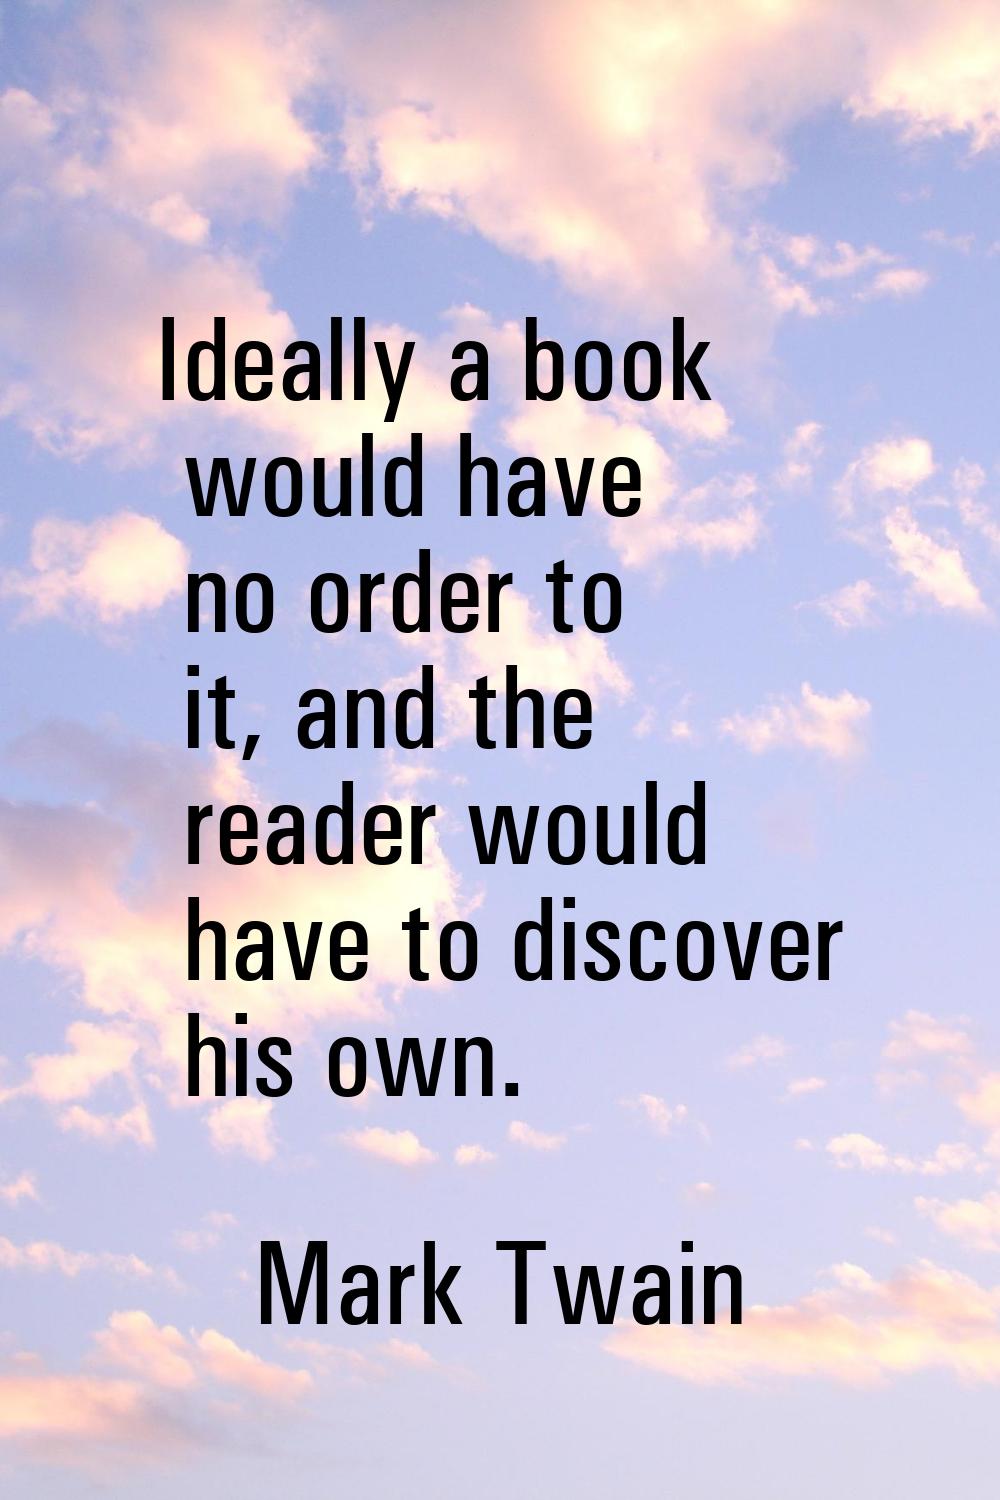 Ideally a book would have no order to it, and the reader would have to discover his own.